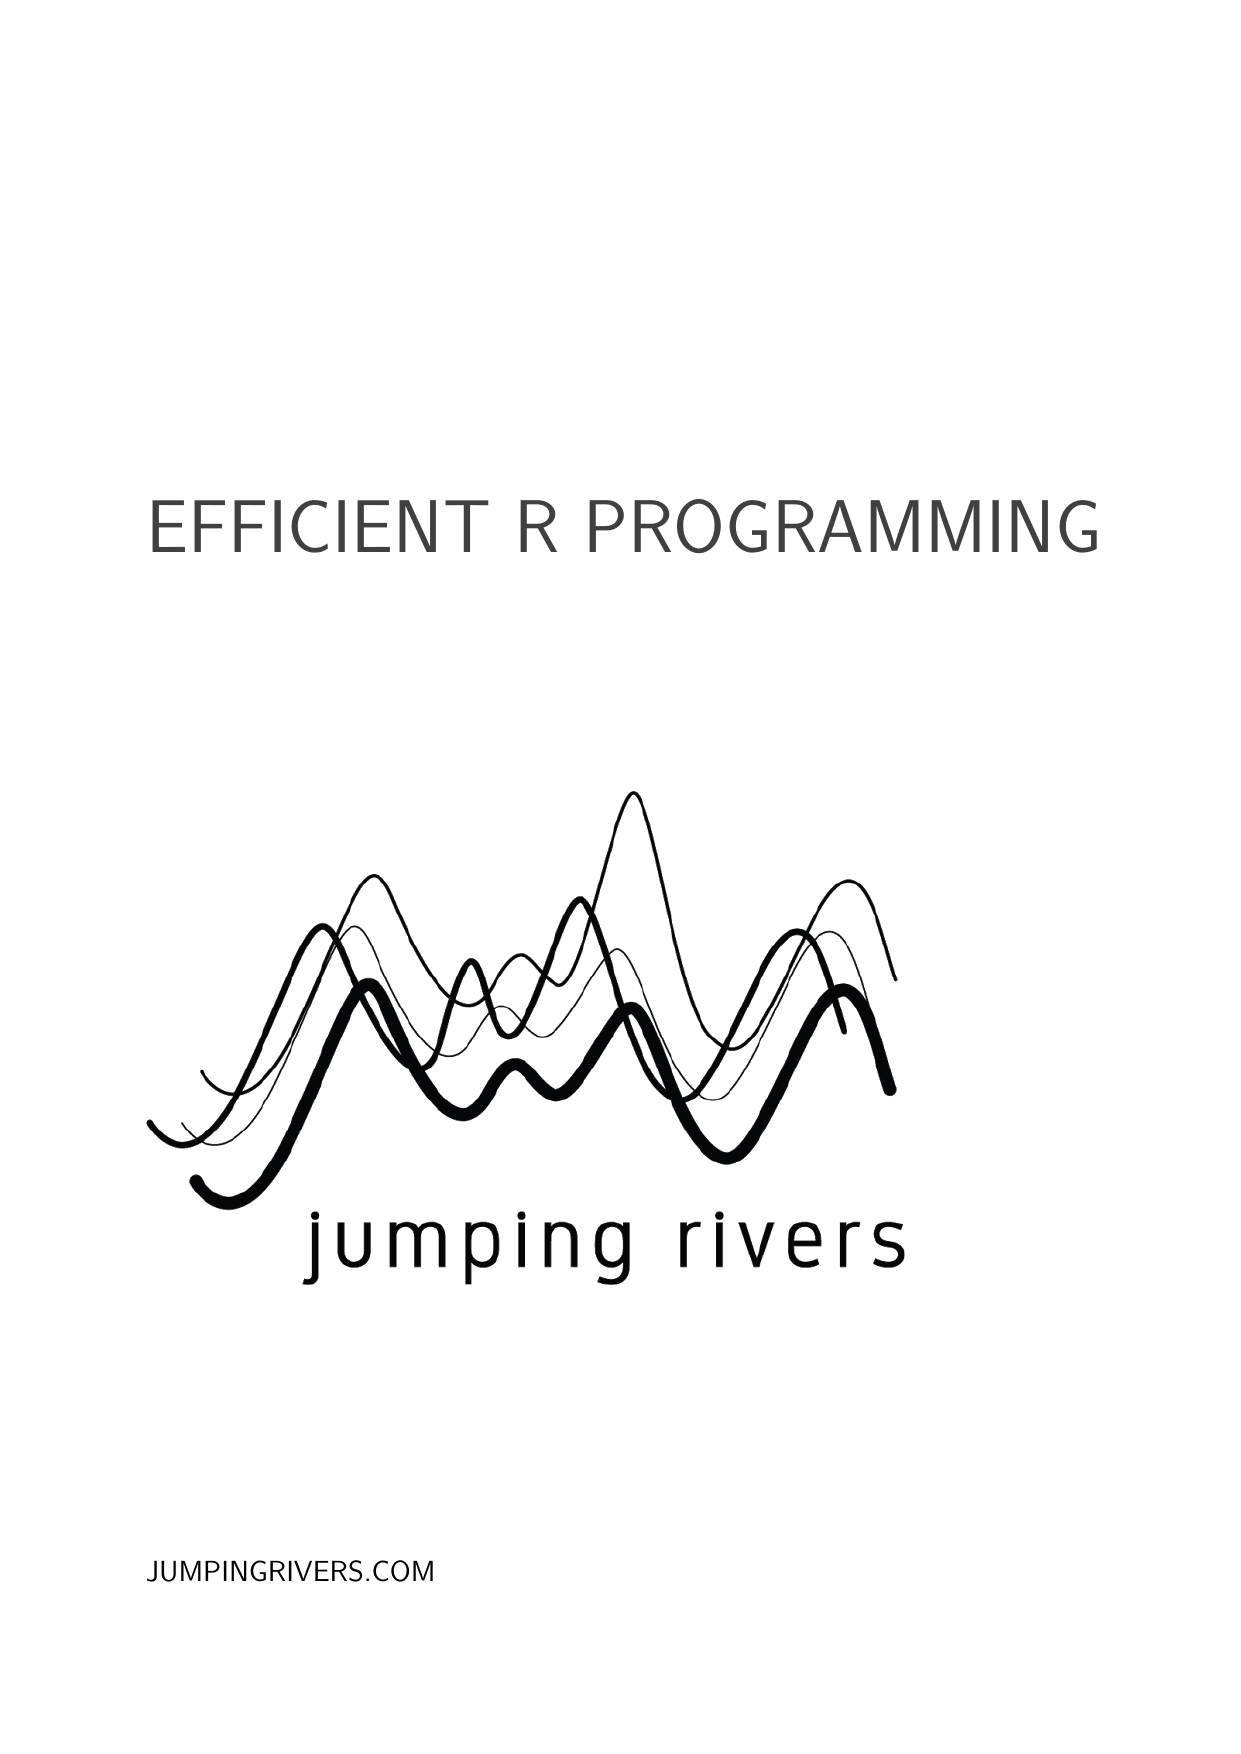 Example course material for 'Efficient R Programming